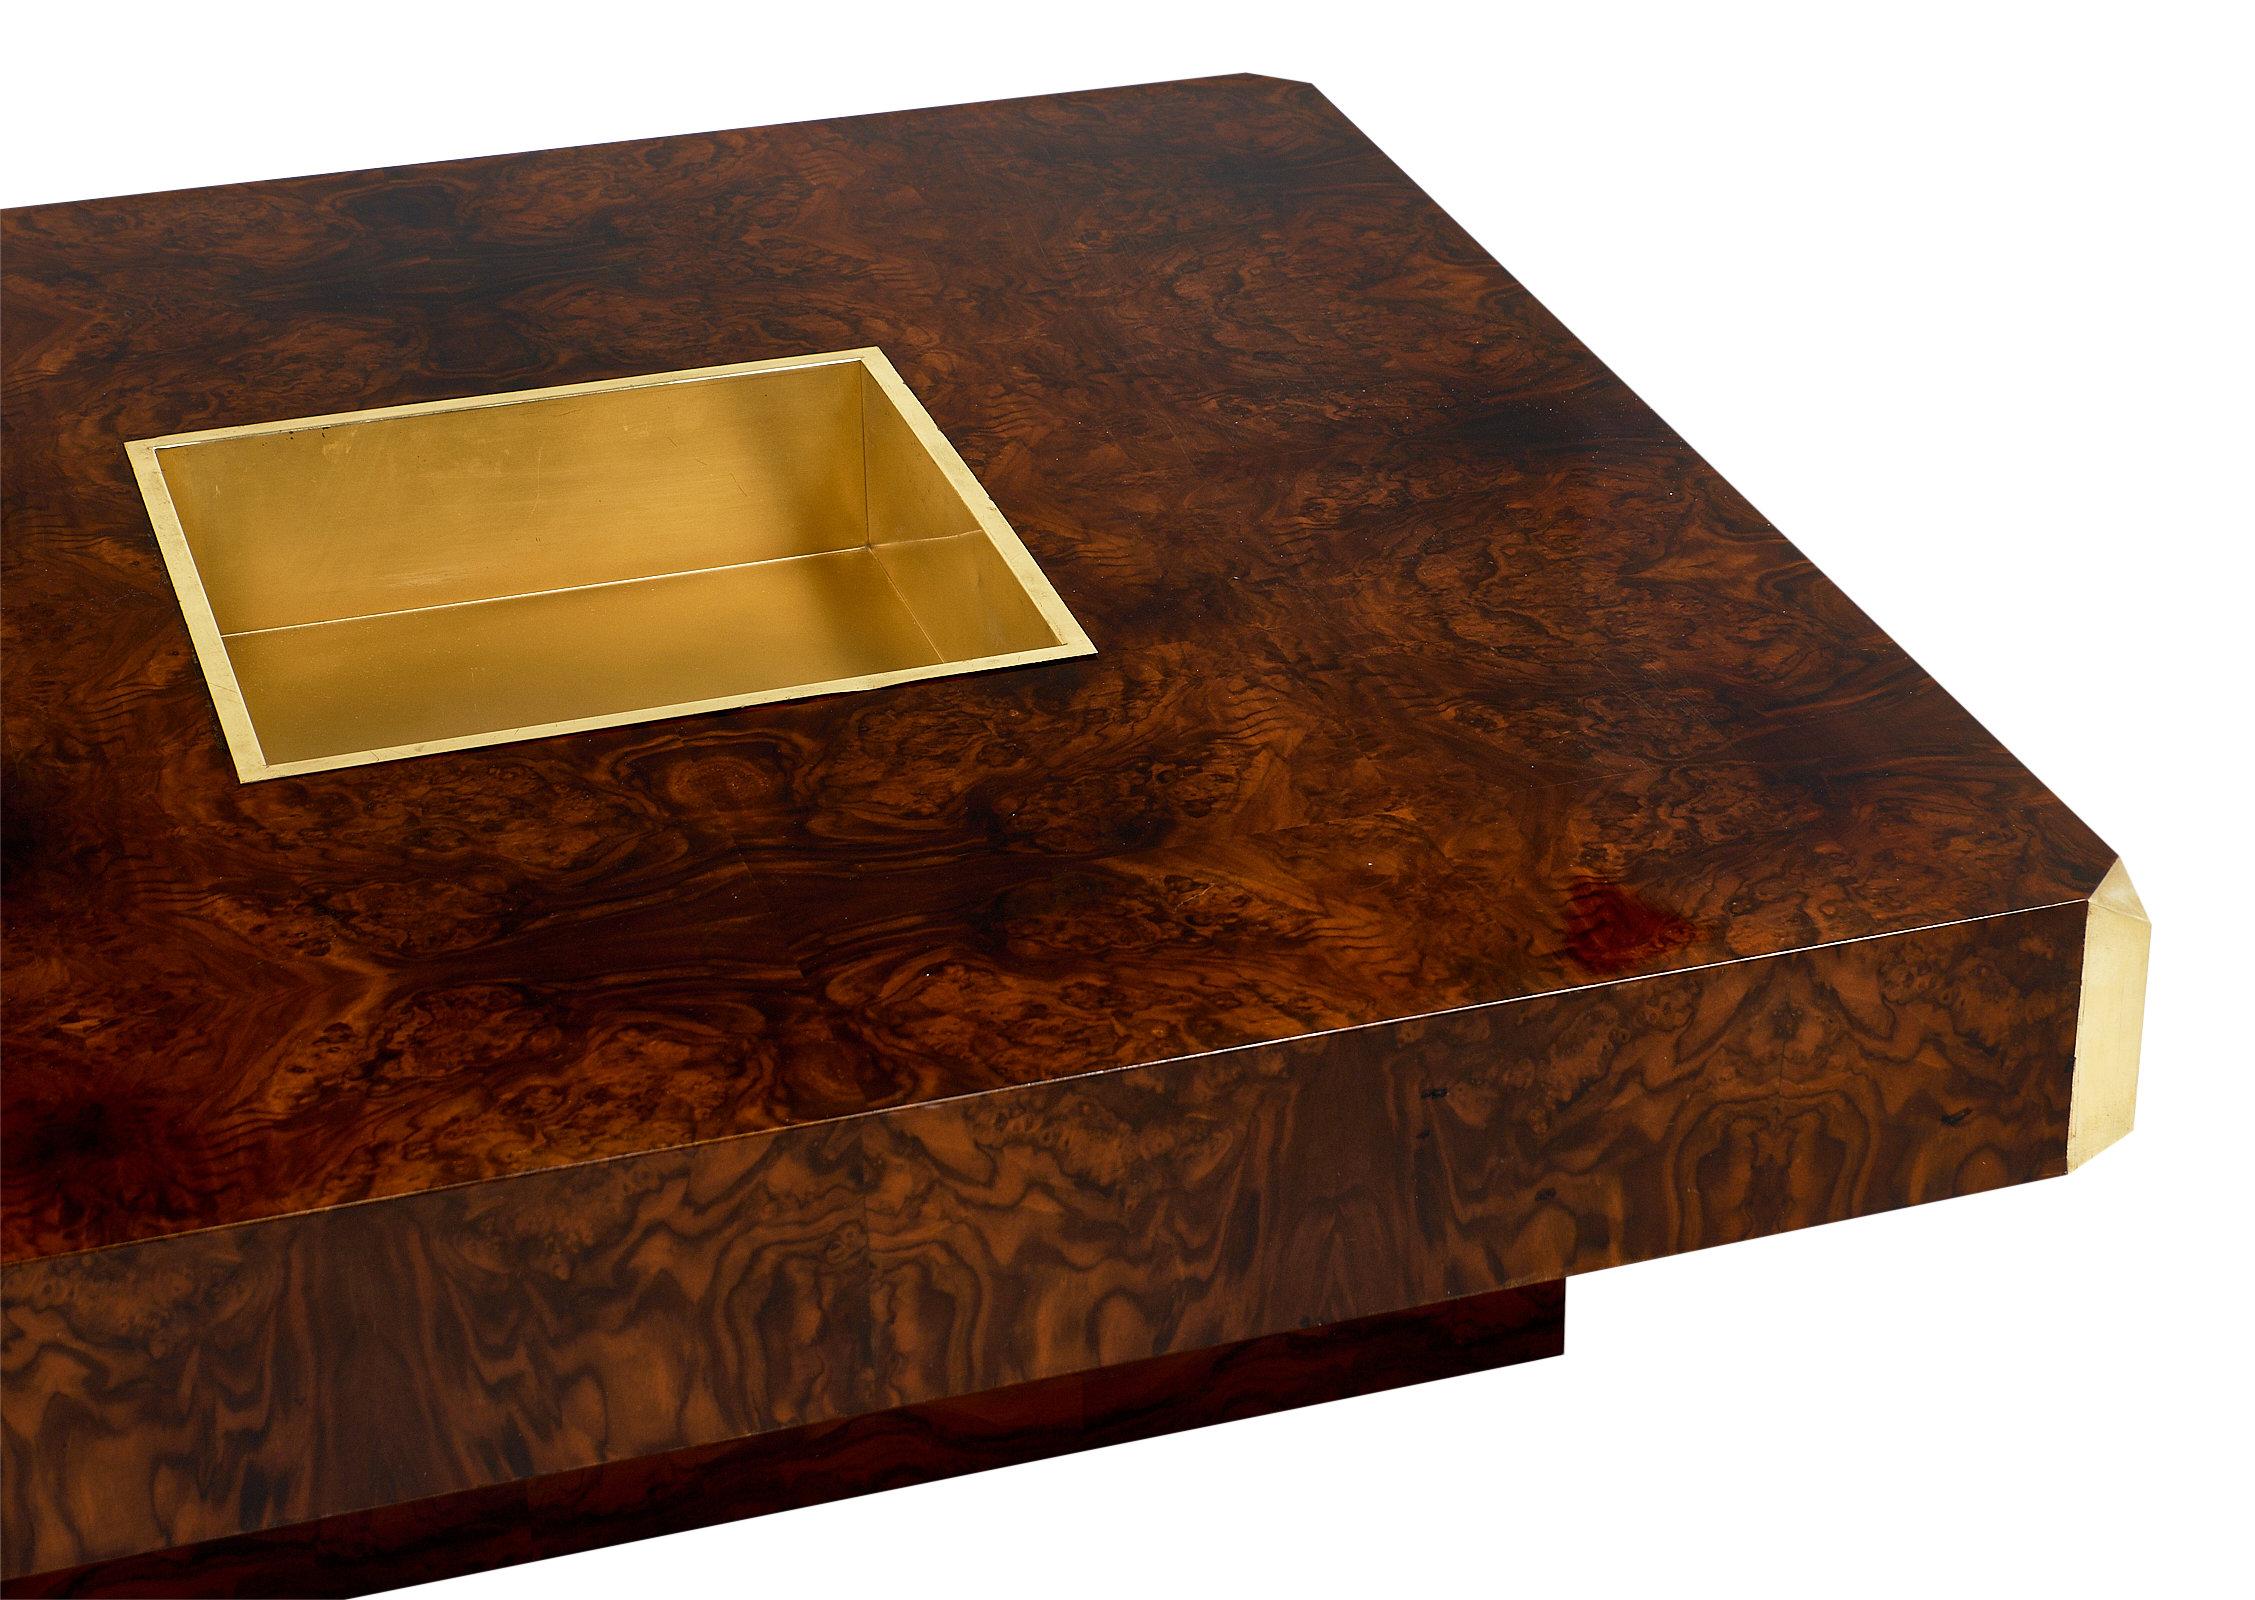 French Burled Walnut and Brass Coffee Table by Willy Rizzo